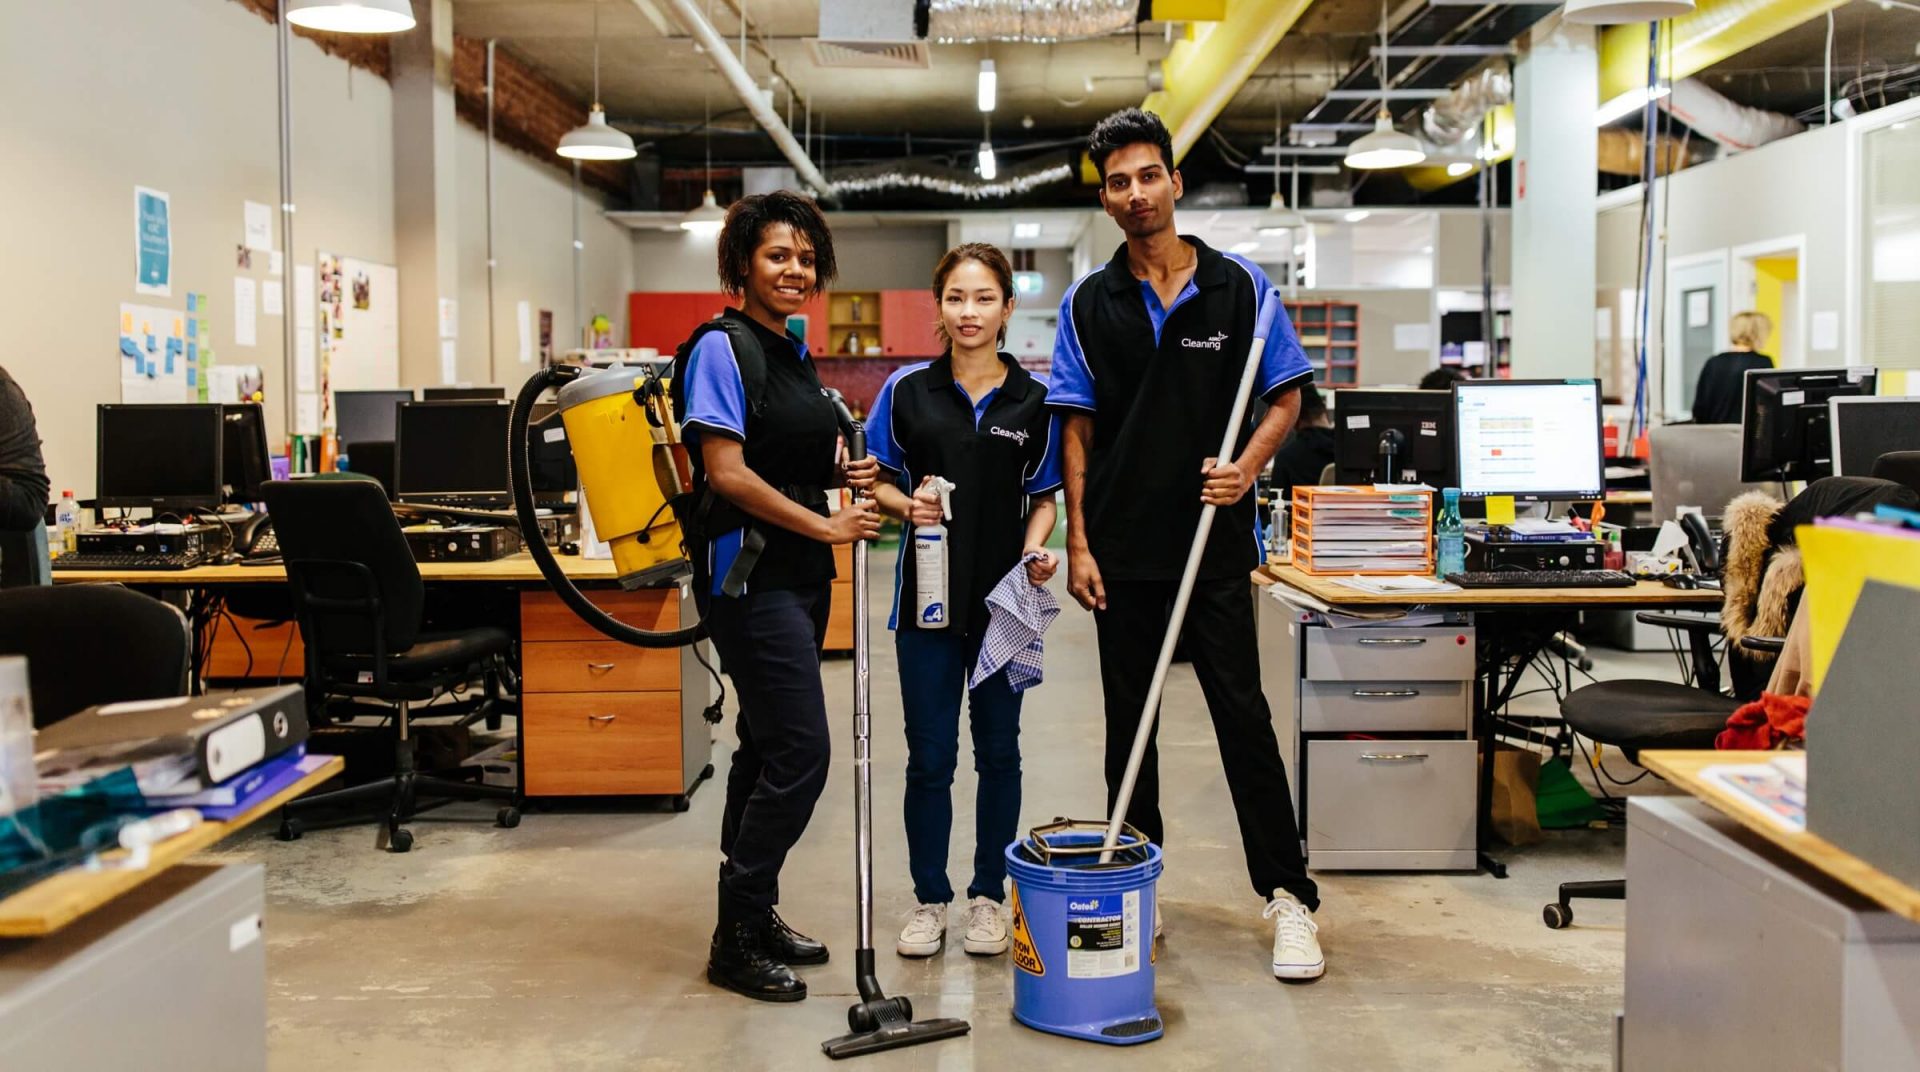 Image of three ASRC Cleaning staff members holding cleaning equipment in an office space